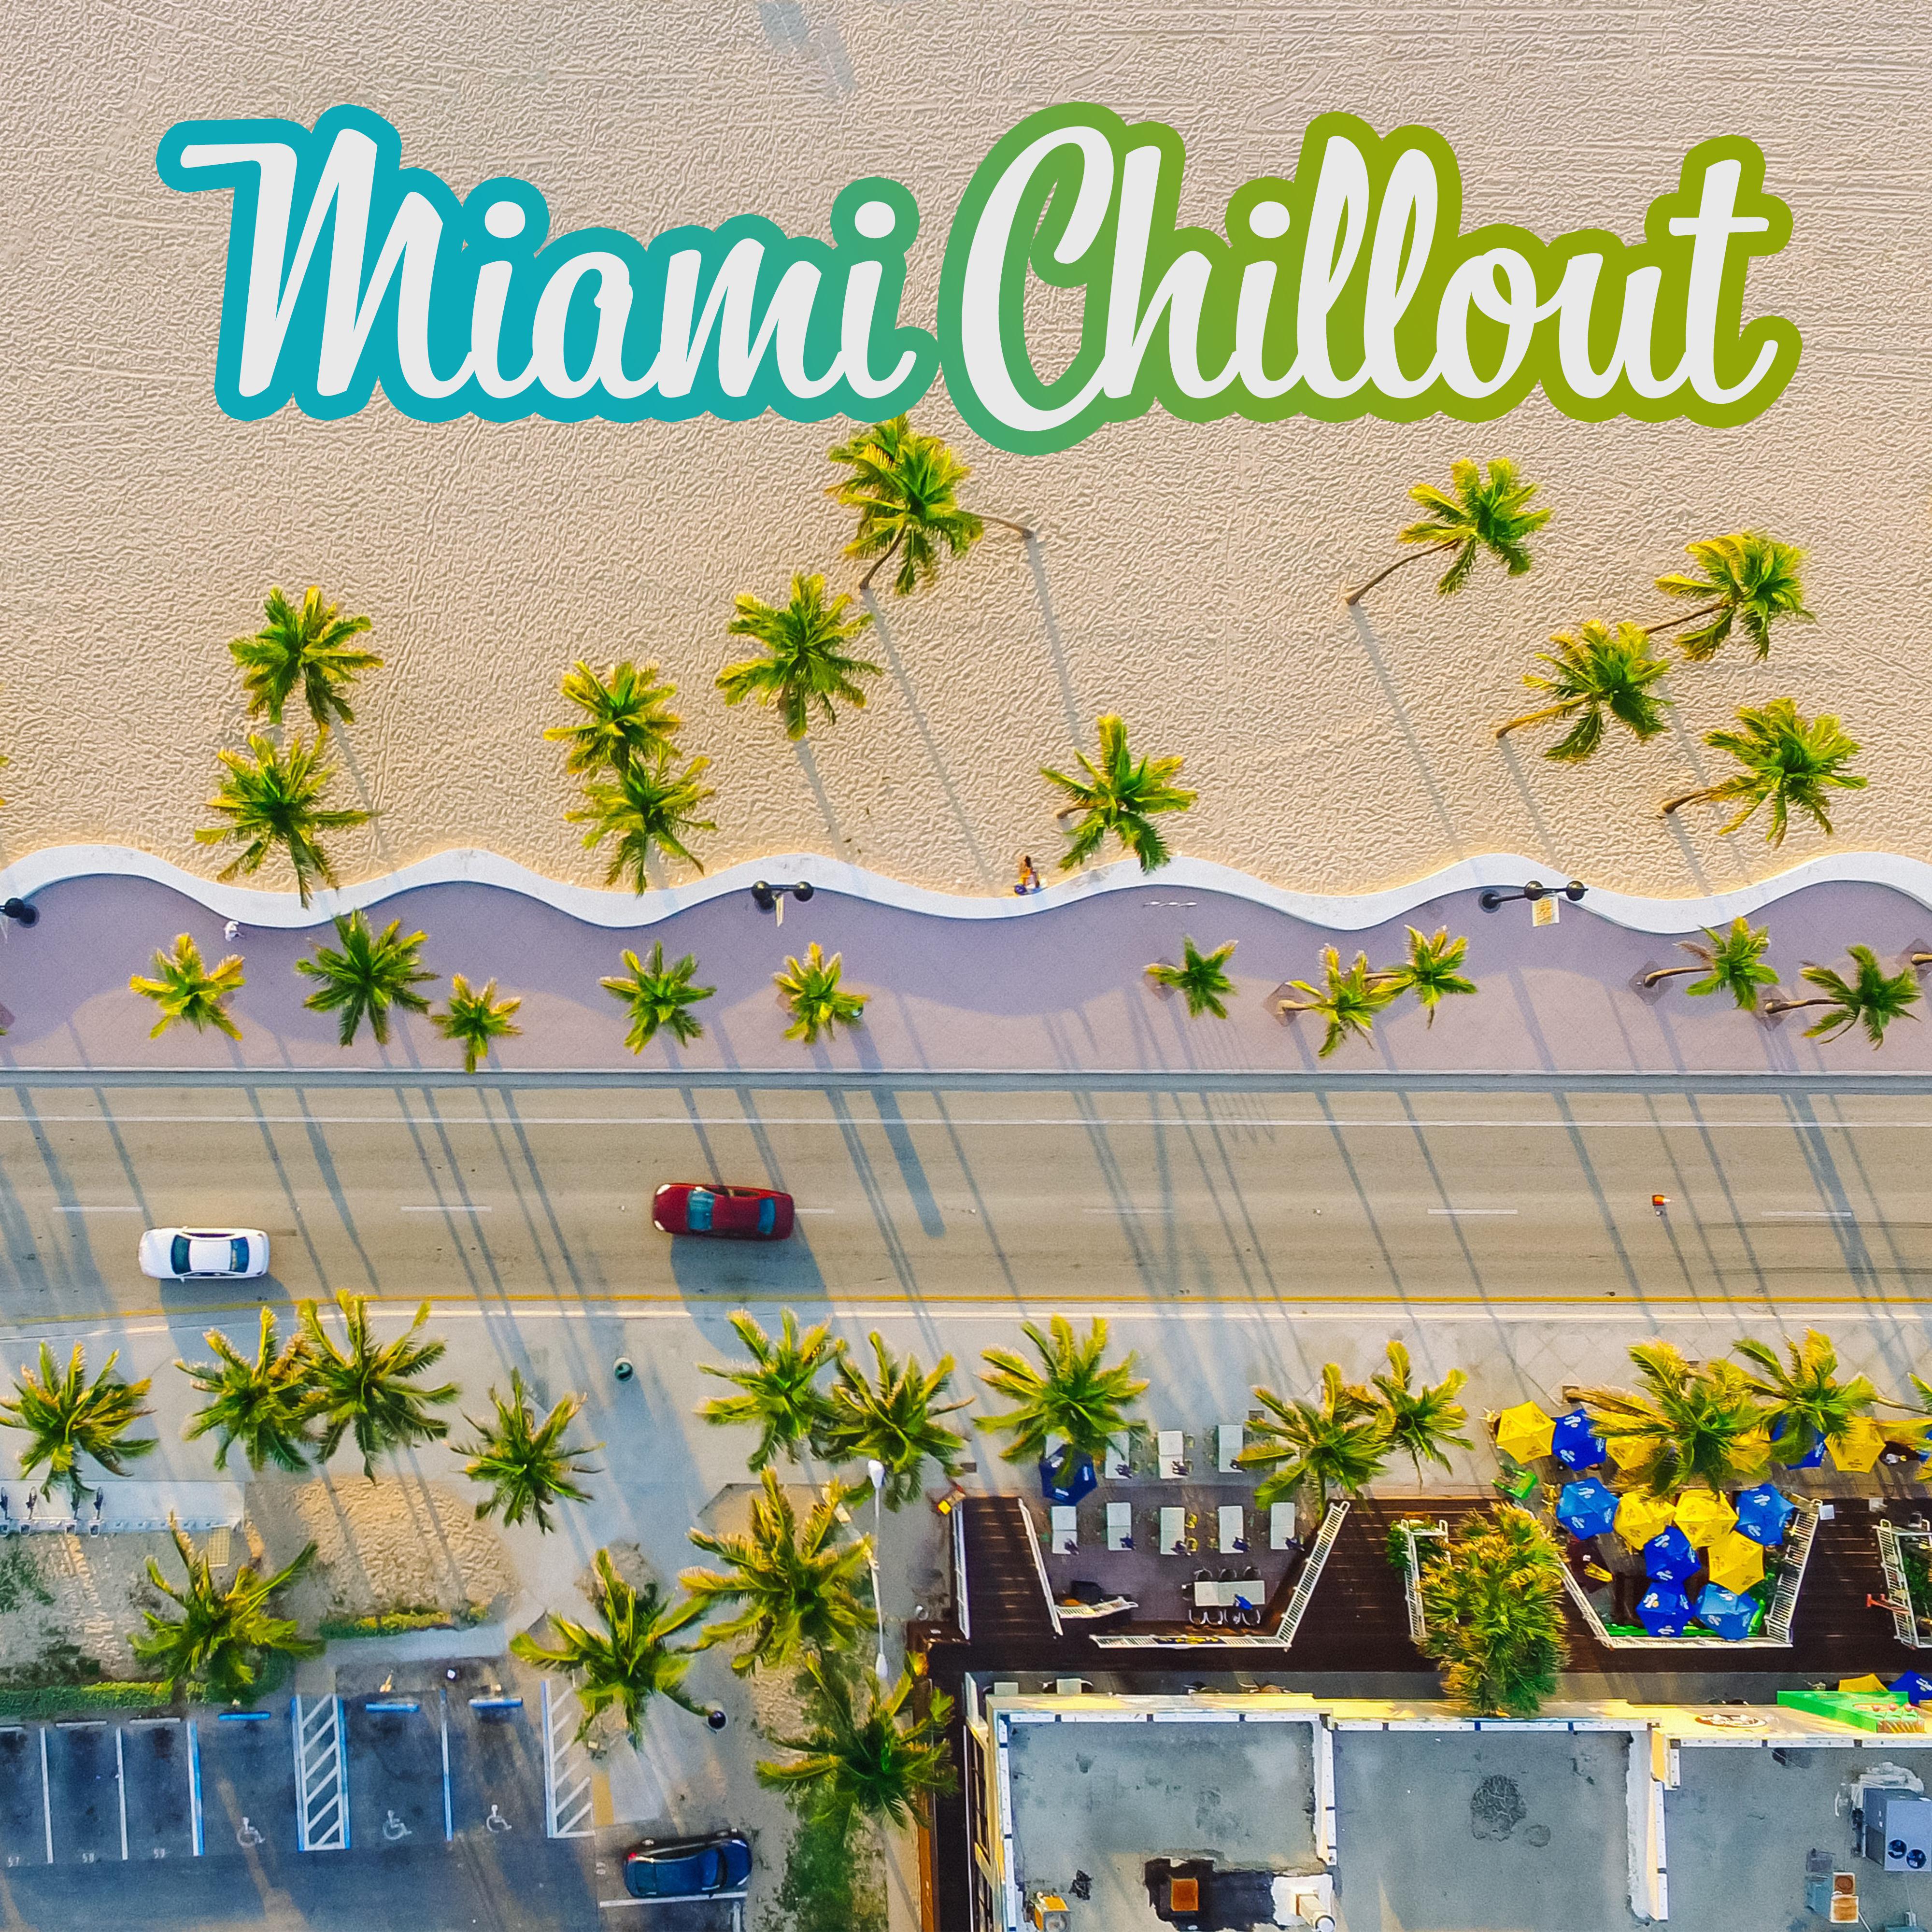 Miami Chillout – Summer Hits 2018, Chill Out Beats